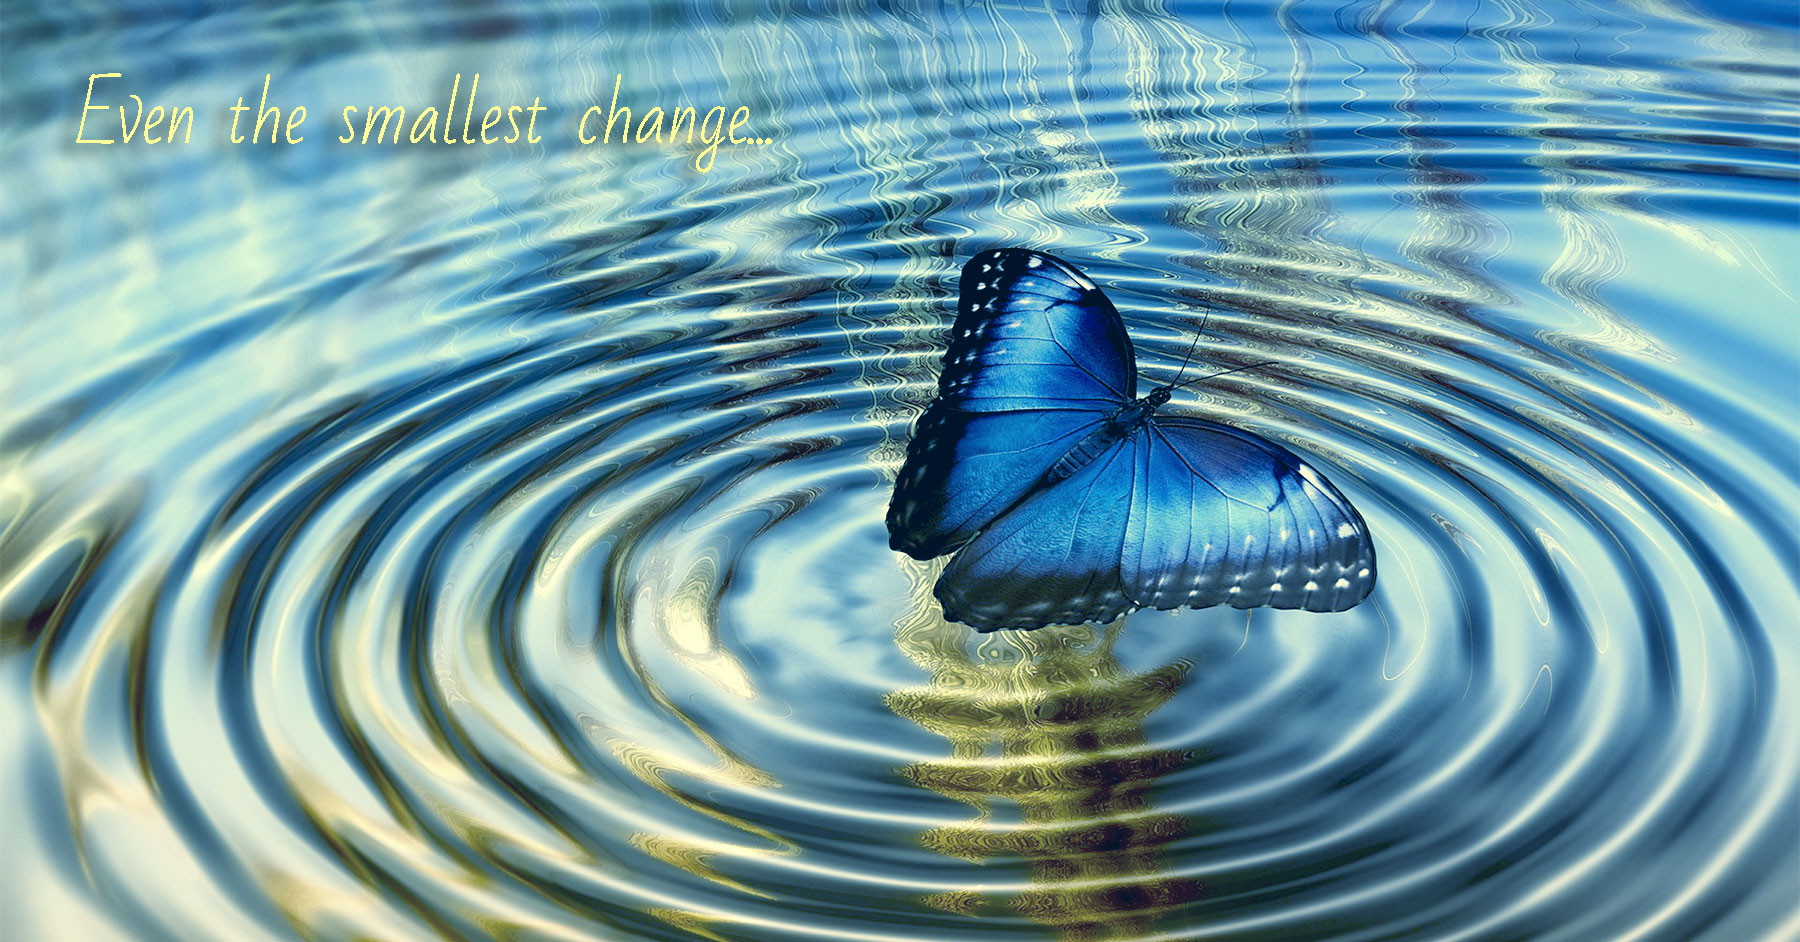 Image of a blue butterfly creating circular ripples on the surface of a pond.